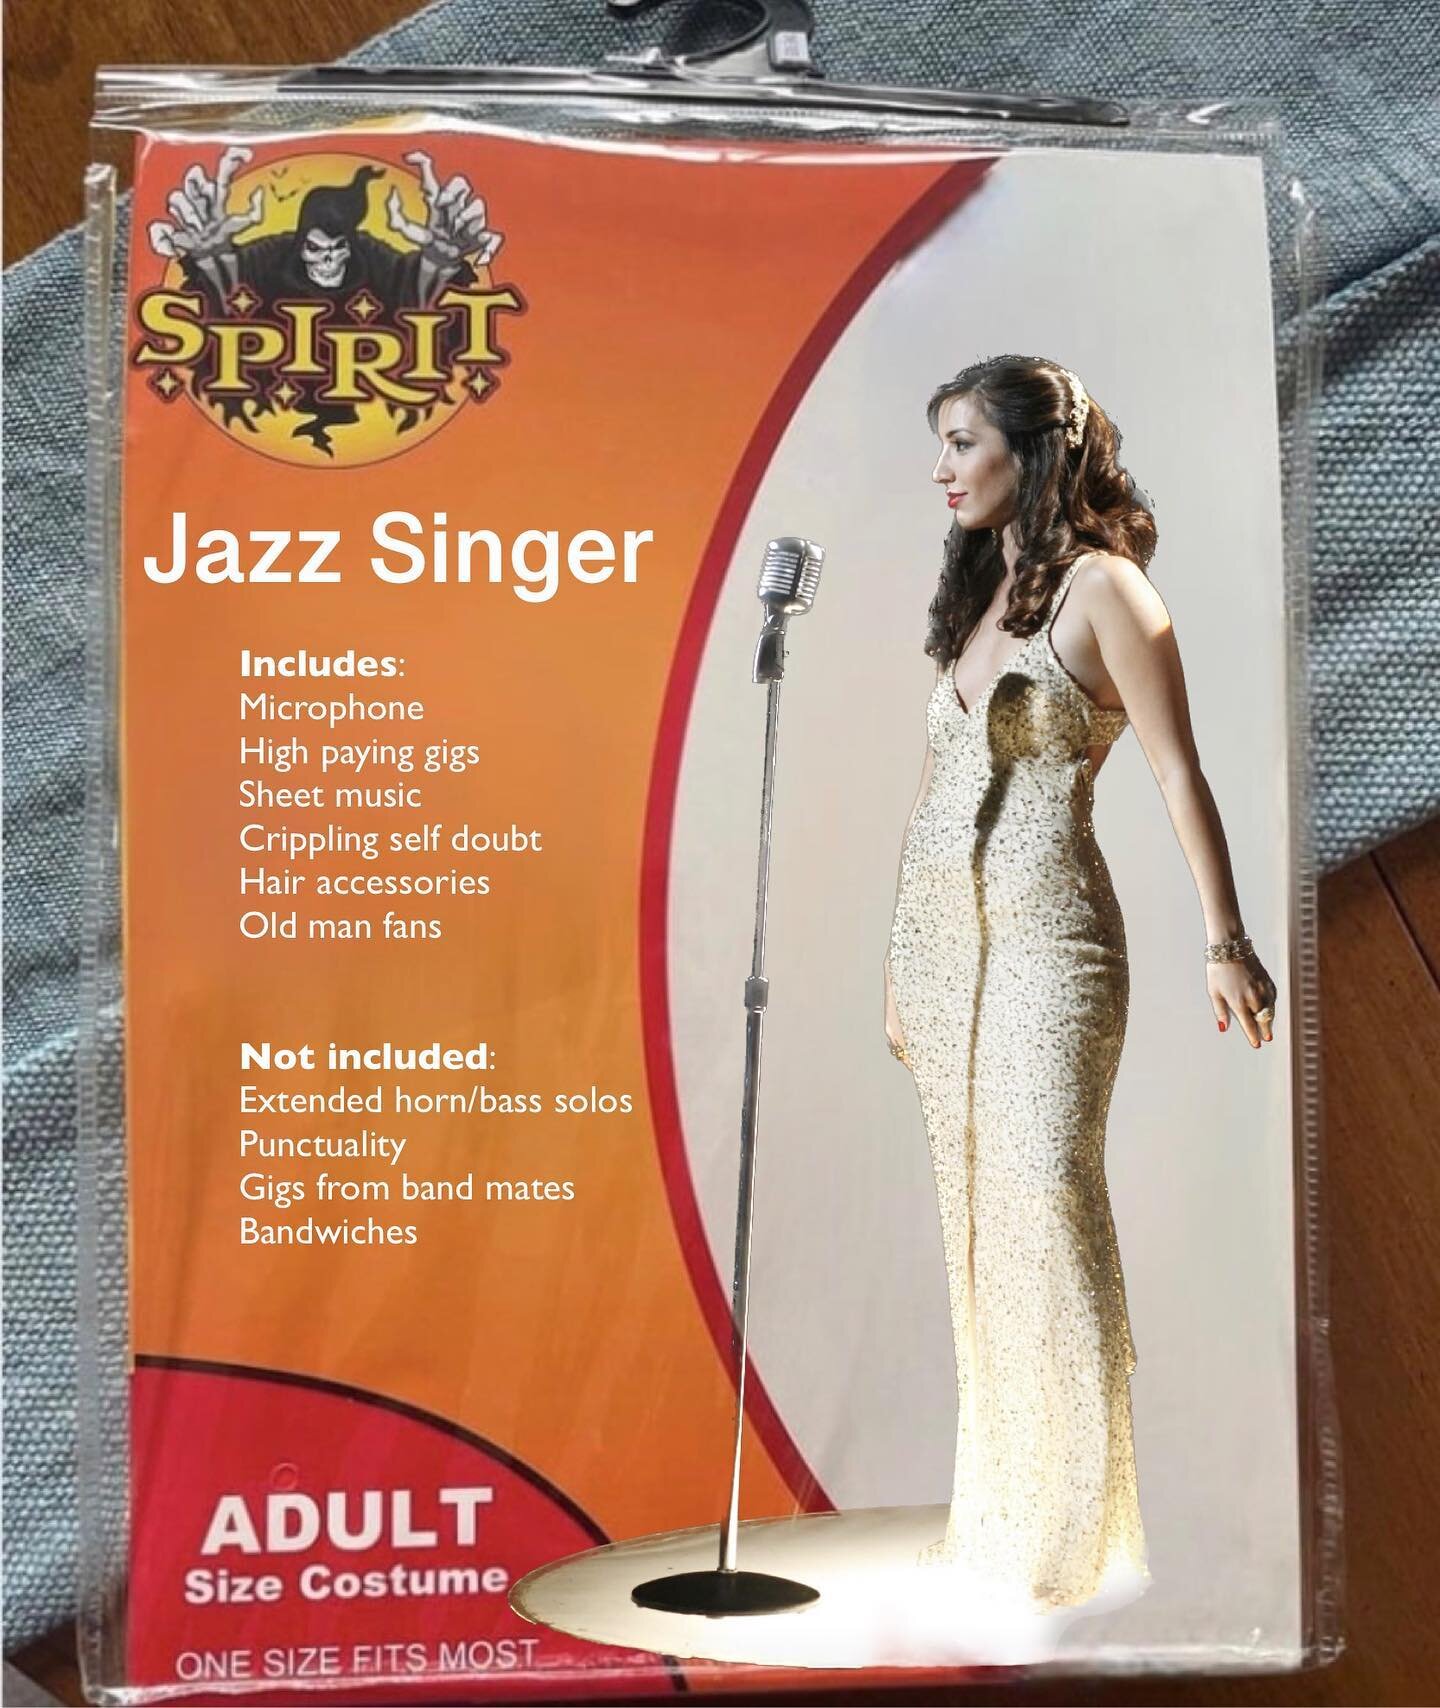 Jazz Singer Costume 🎃 IYKYK getting rid of this costume if you want it, doesn&rsquo;t fit me anymore ☠️ #jazzsinger #jazz #jazzmemes #jazzsingerproblems #spiritcostumememe #spiritcostume #spirit #halloweencostume #halloween #jazzhalloween #band #jaz